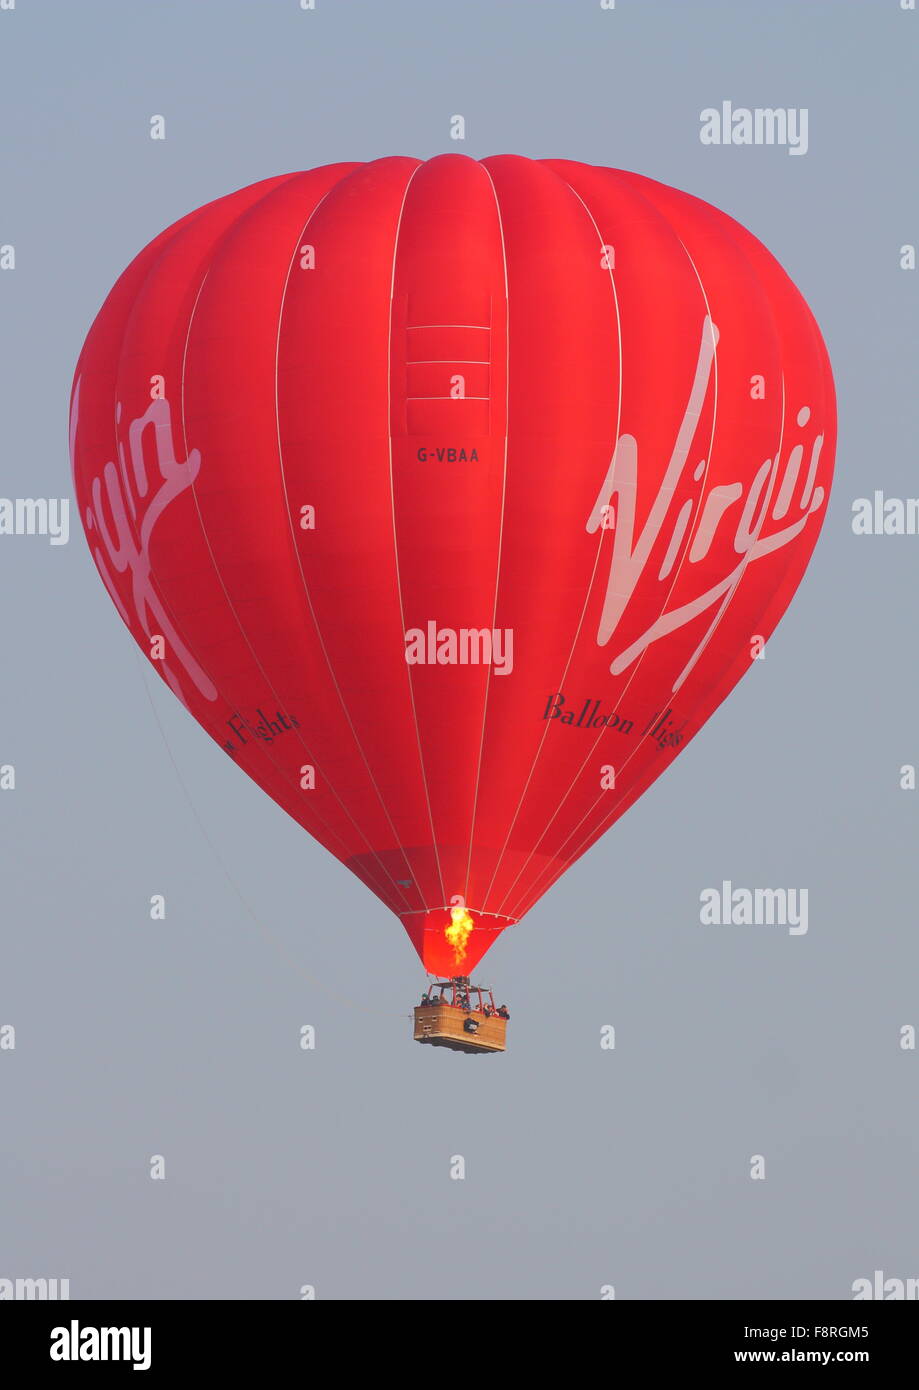 Virgin Balloon taking off from a field in Henley on Thames, Oxfordshire, UK Stock Photo